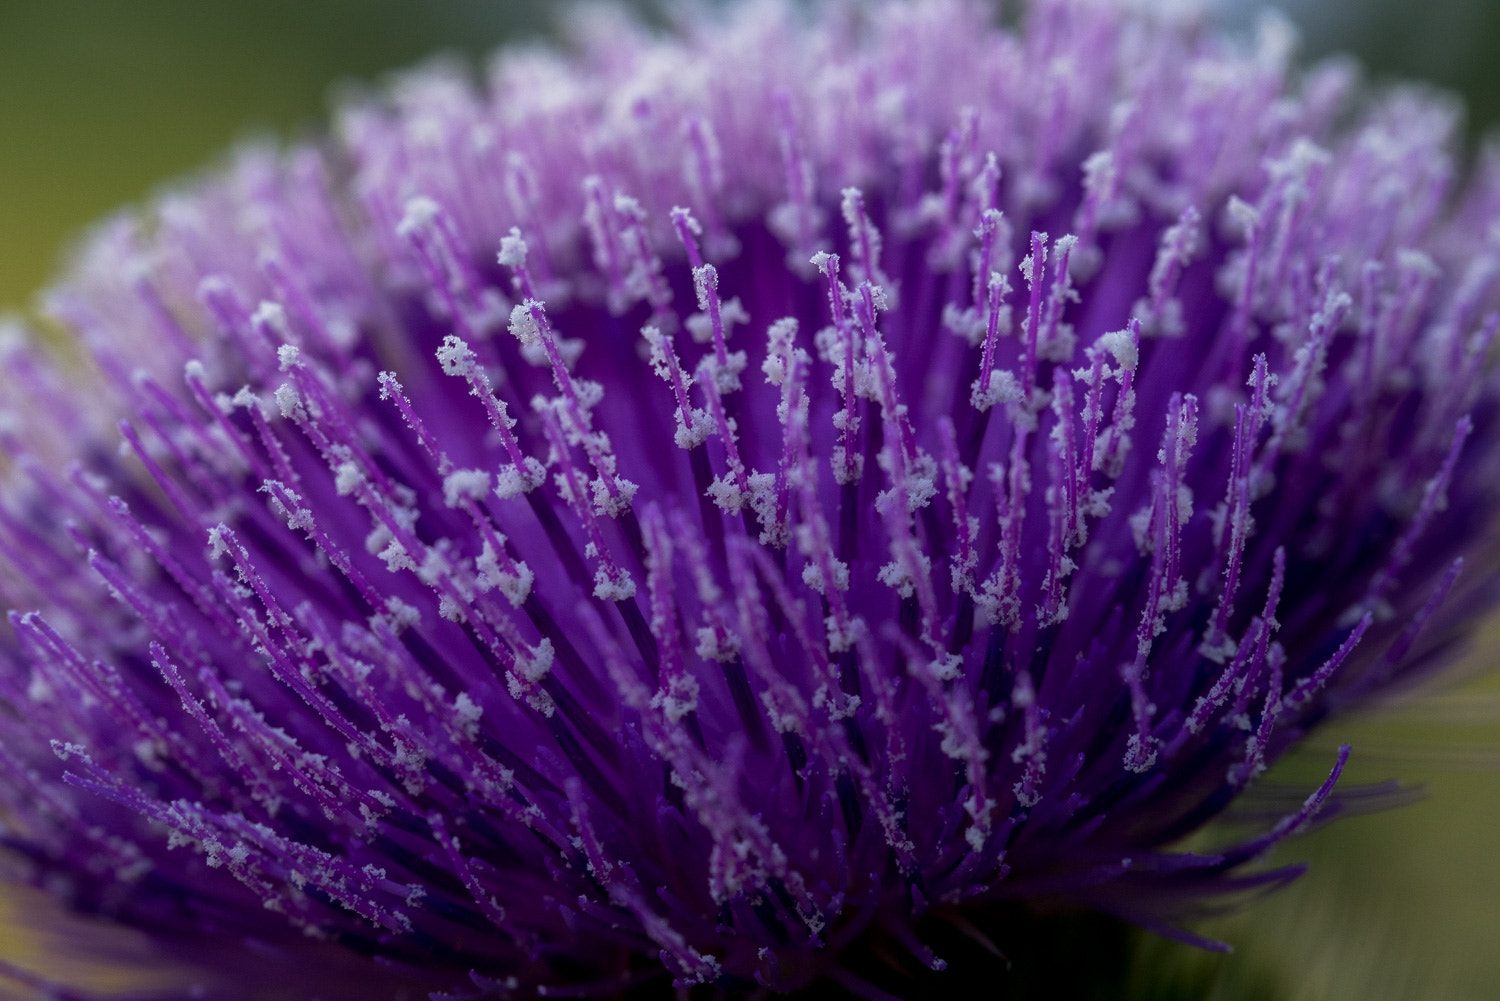 Pentax K-1 sample photo. Flower of a thistle complete with pollen photography